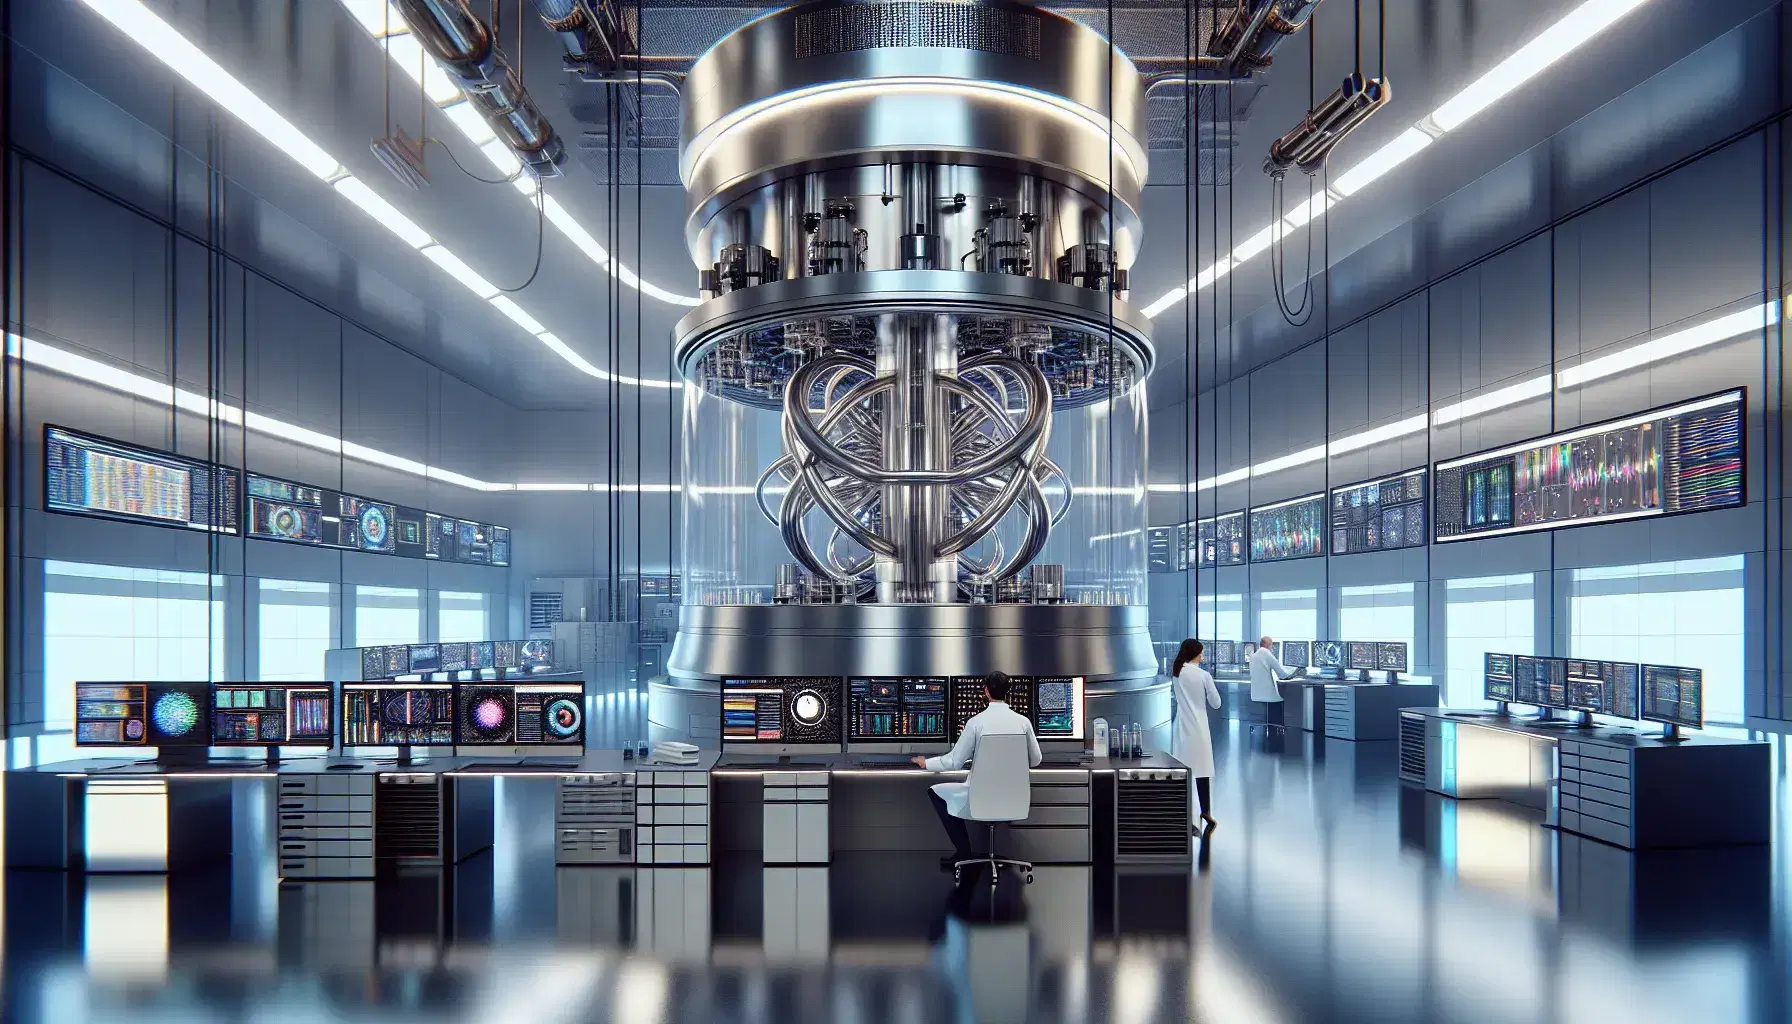 Modern quantum computer lab with scientists at work, featuring a cylindrical quantum computer suspended from the ceiling and high-tech equipment.